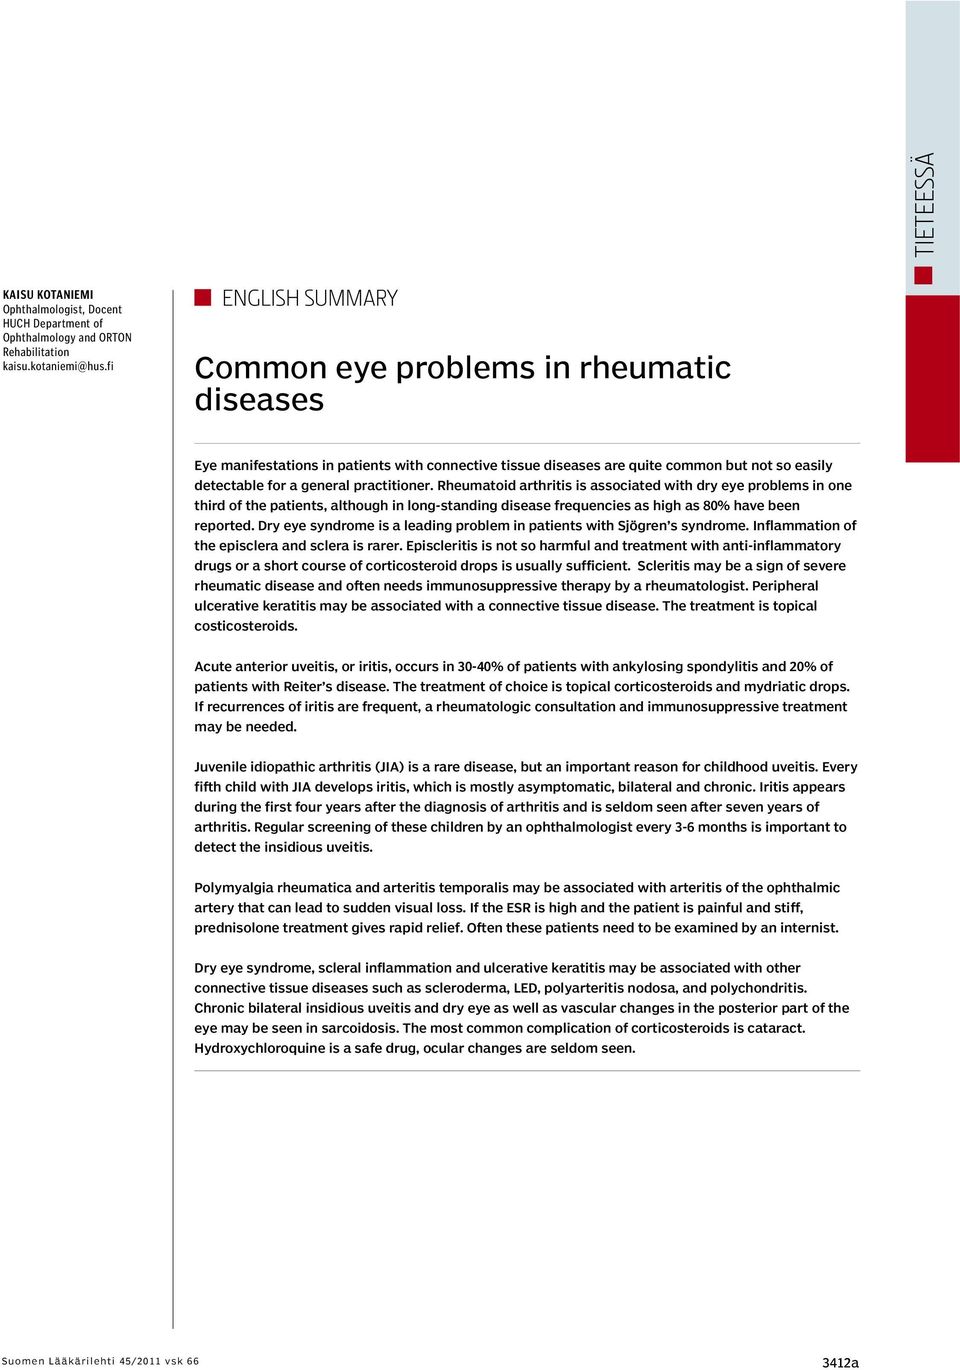 Rheumatoid arthritis is associated with dry eye problems in one third of the patients, although in long-standing disease frequencies as high as 80% have been reported.